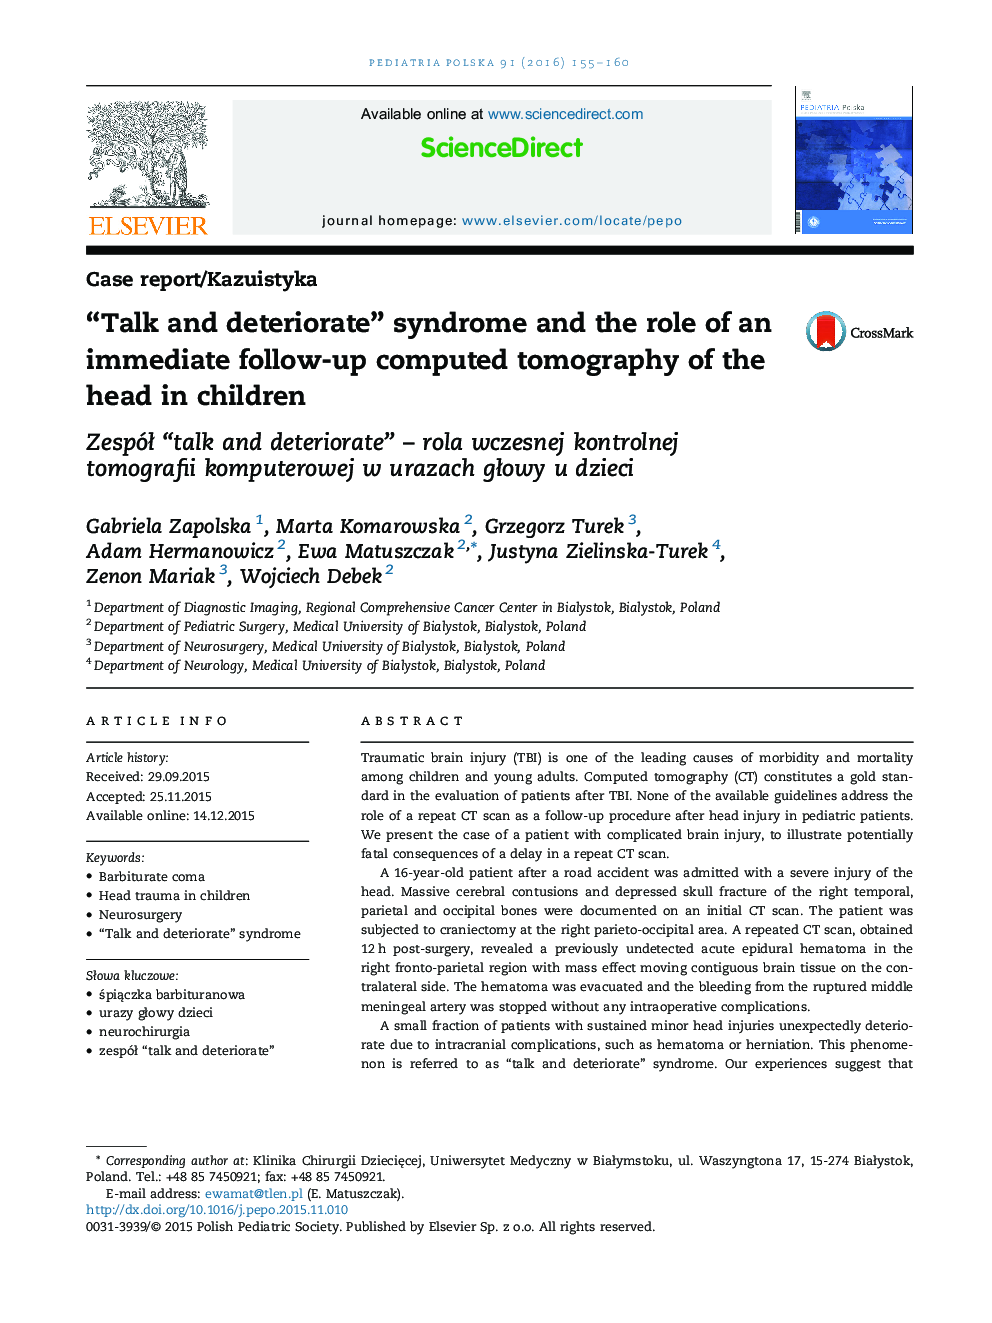 “Talk and deteriorate” syndrome and the role of an immediate follow-up computed tomography of the head in children